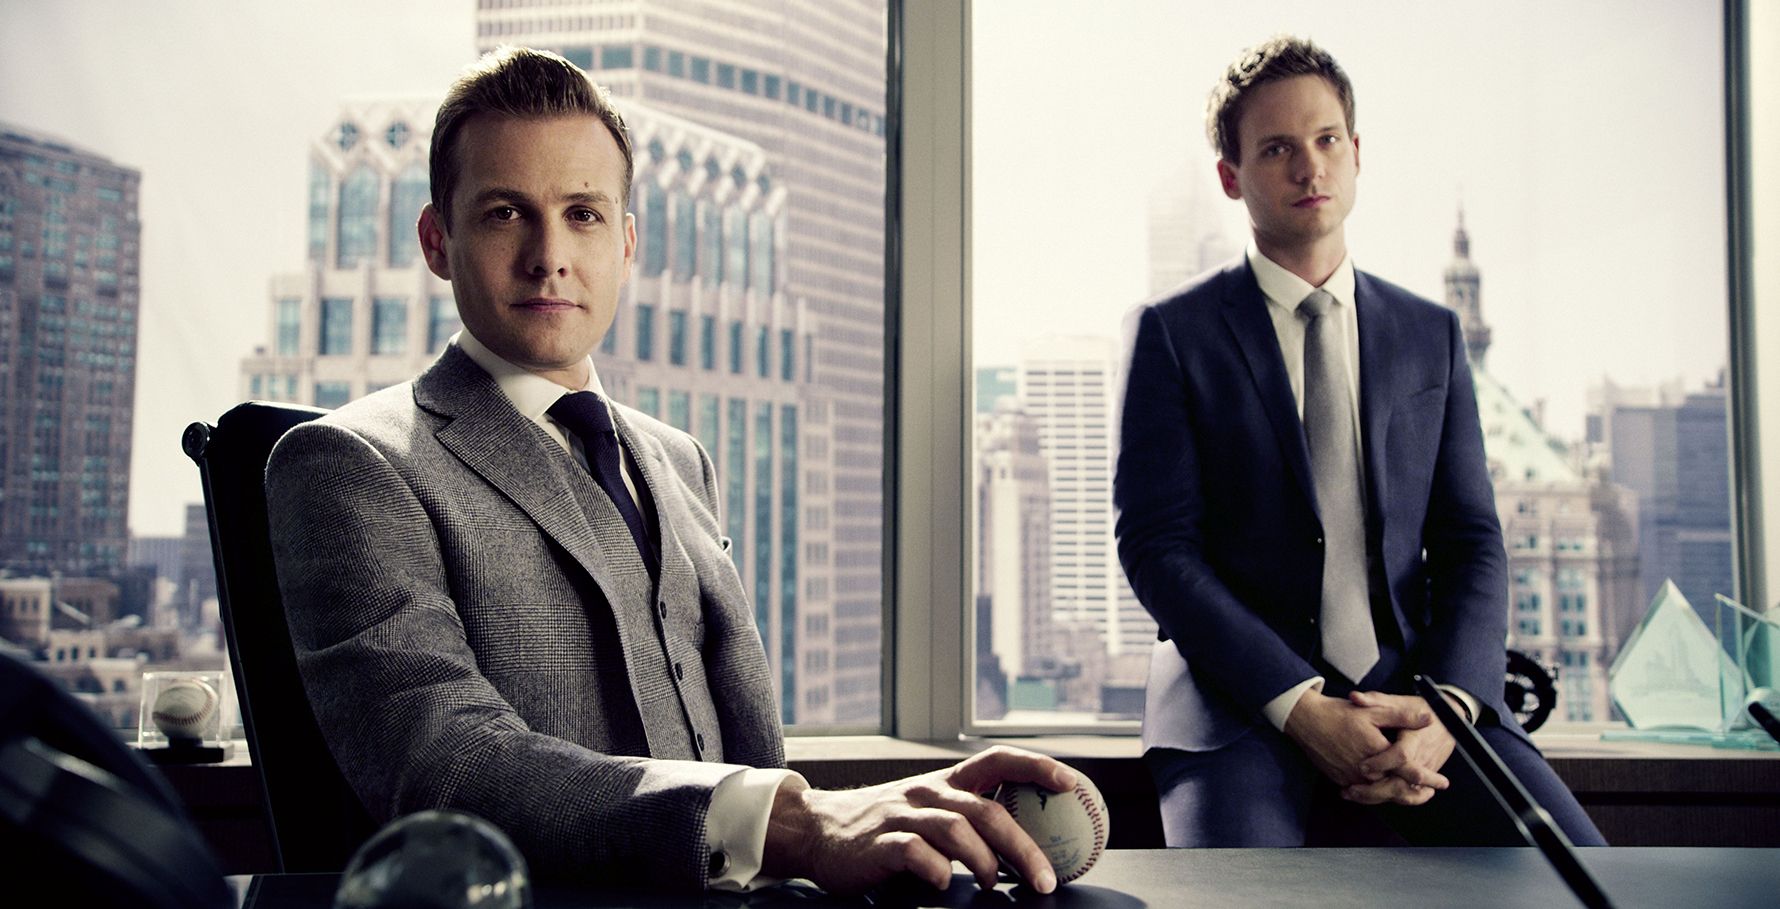 Suits' Sets Another Nielsen Streaming Top 10 Record for Acquisitions